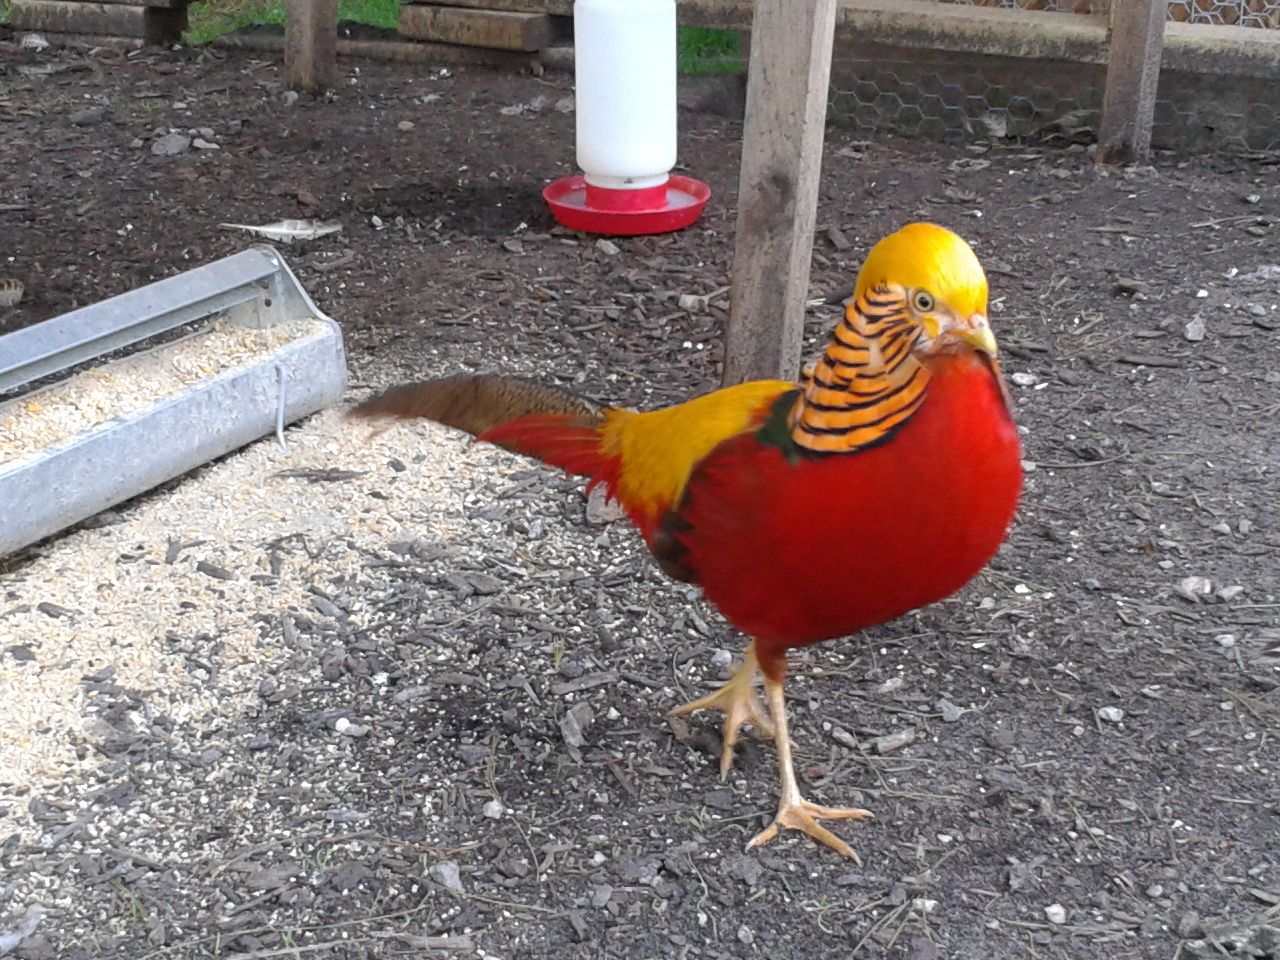 BEGINNERS GUIDE FOR THE RED GOLDEN PHEASANT (PIC HEAVY) WITH MUTATION PICS BackYard Chickens image